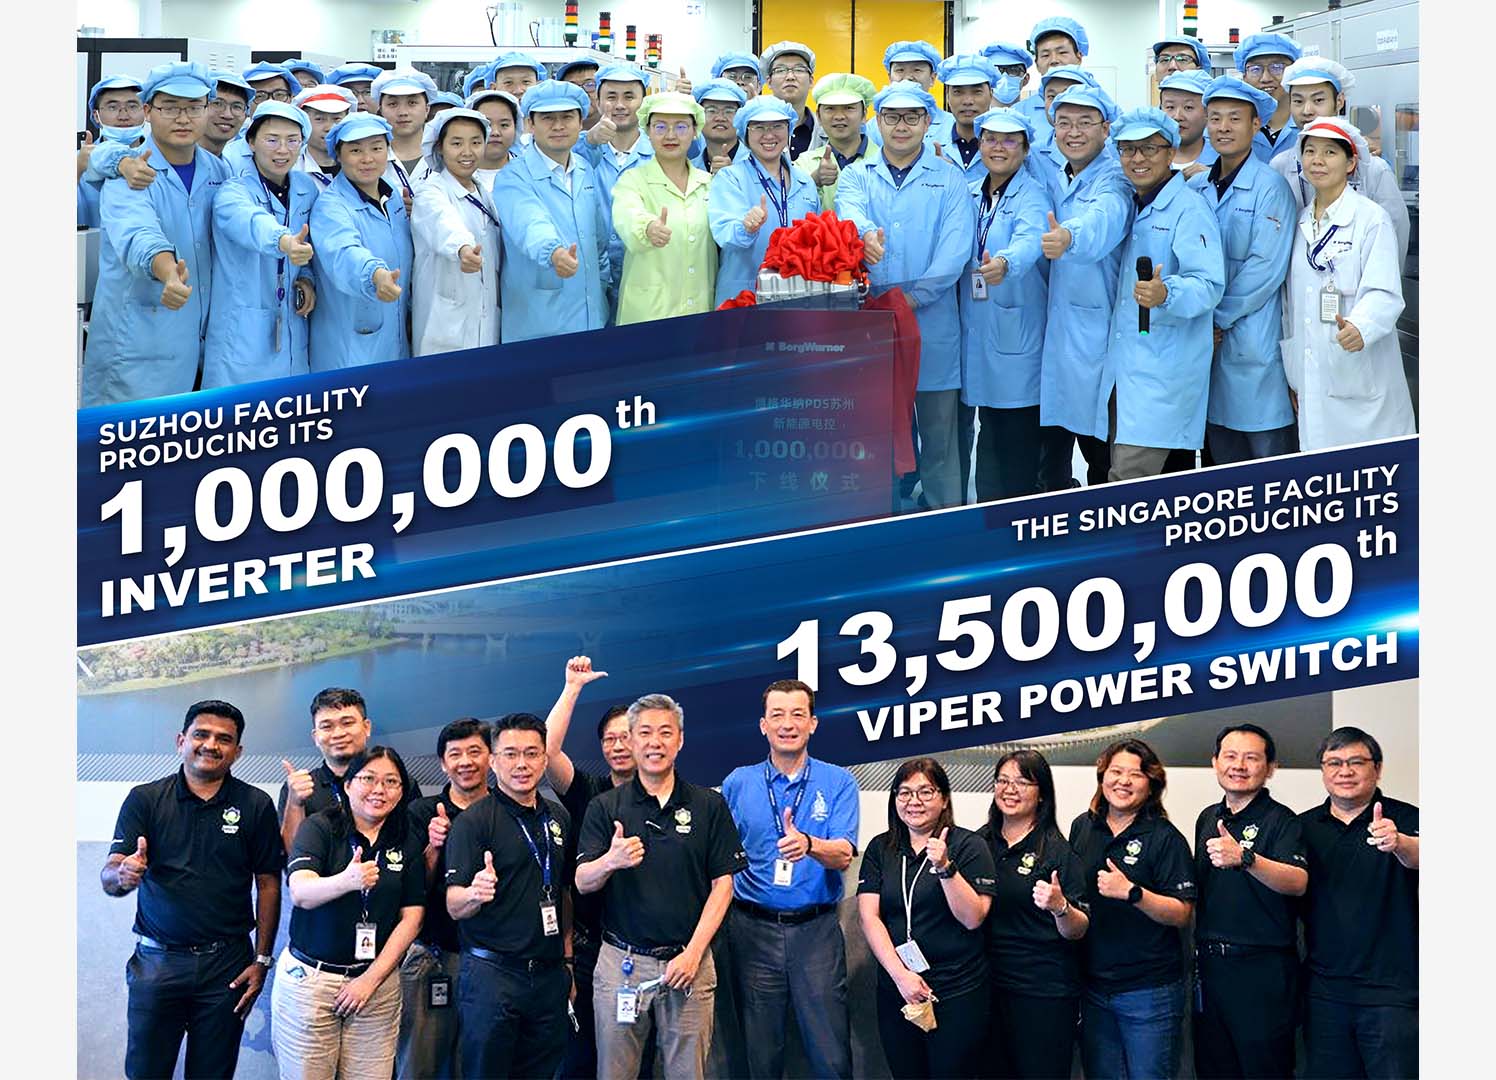 BorgWarner Sites Celebrated Production of 1000000th Inverter and 13500000th Viper Power Switch